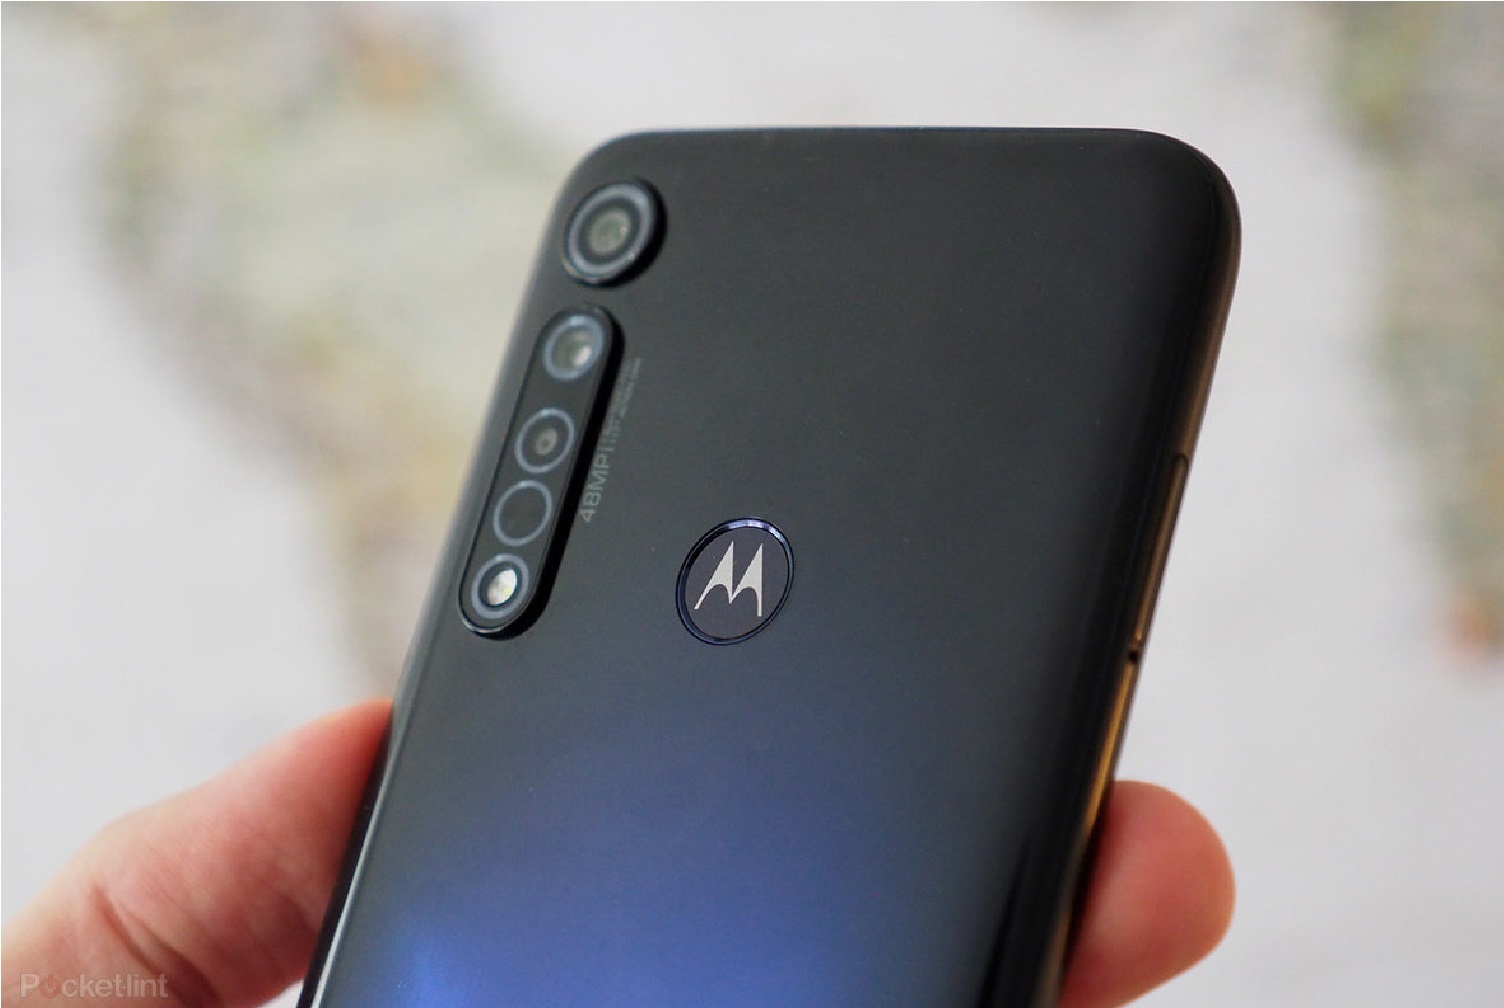 153137 phones news feature motorola moto g9 plus release date specs rumours and features image1 vq8grnbmha